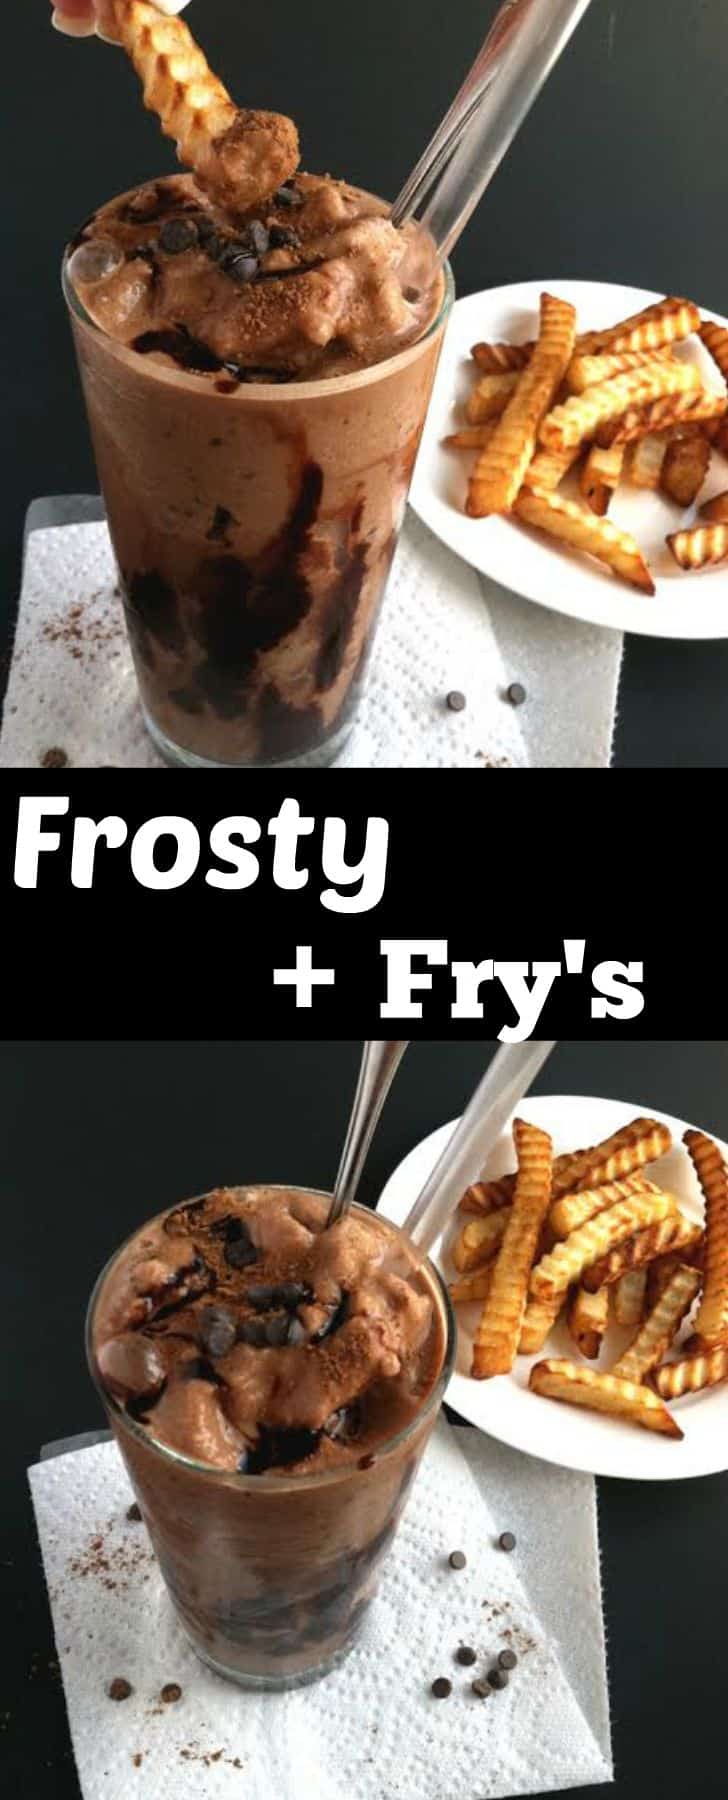 Frosty and Frys